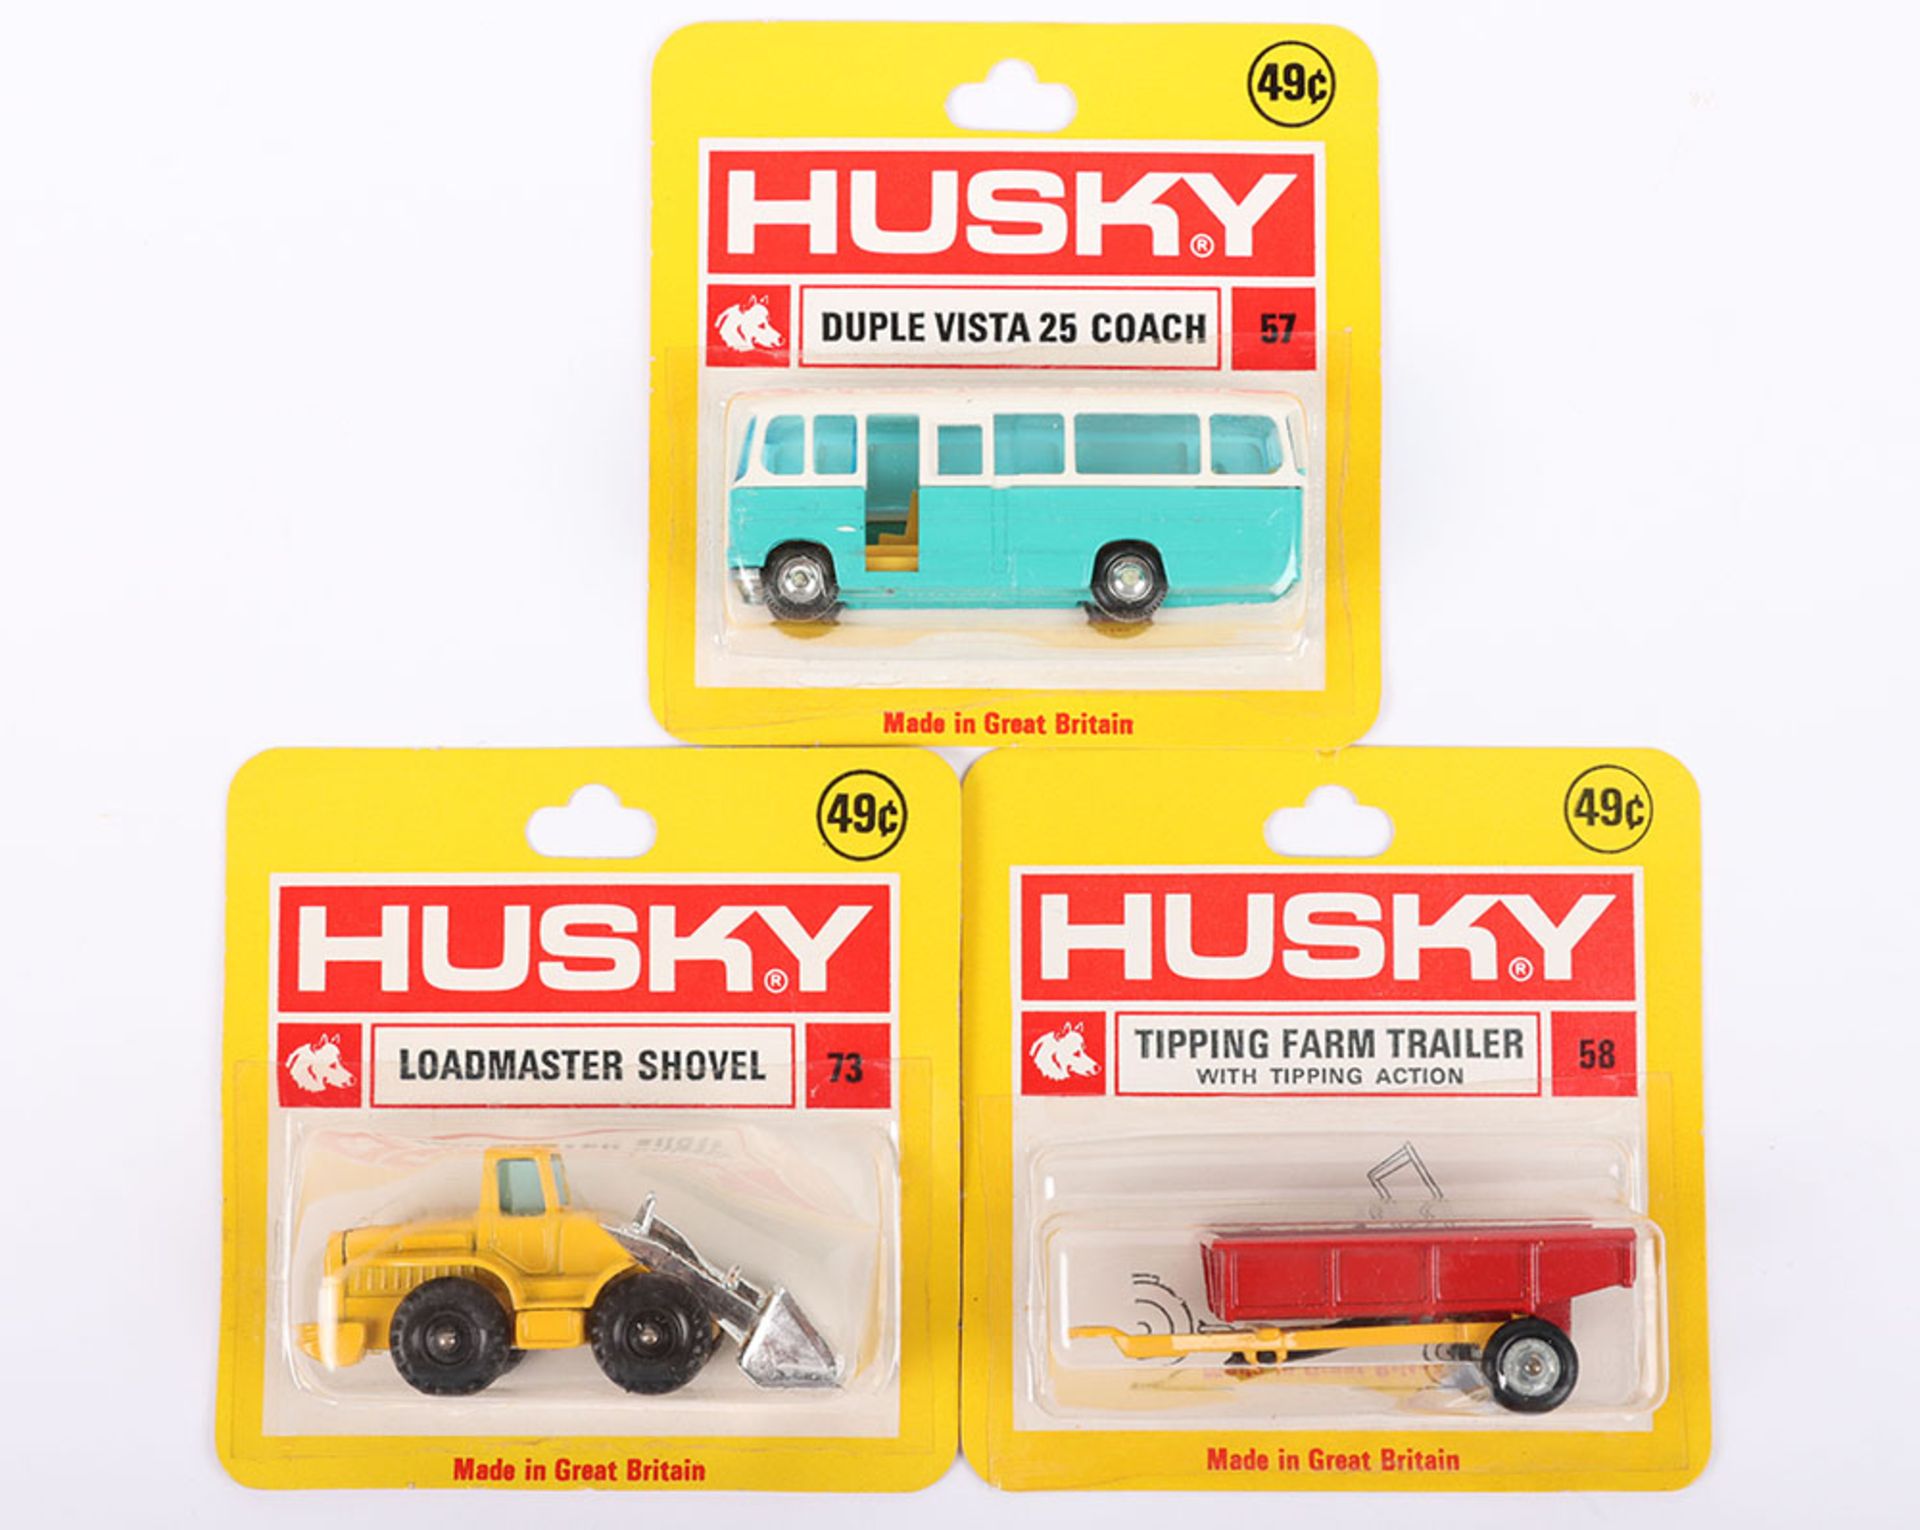 Three Carded USA issue Husky Models